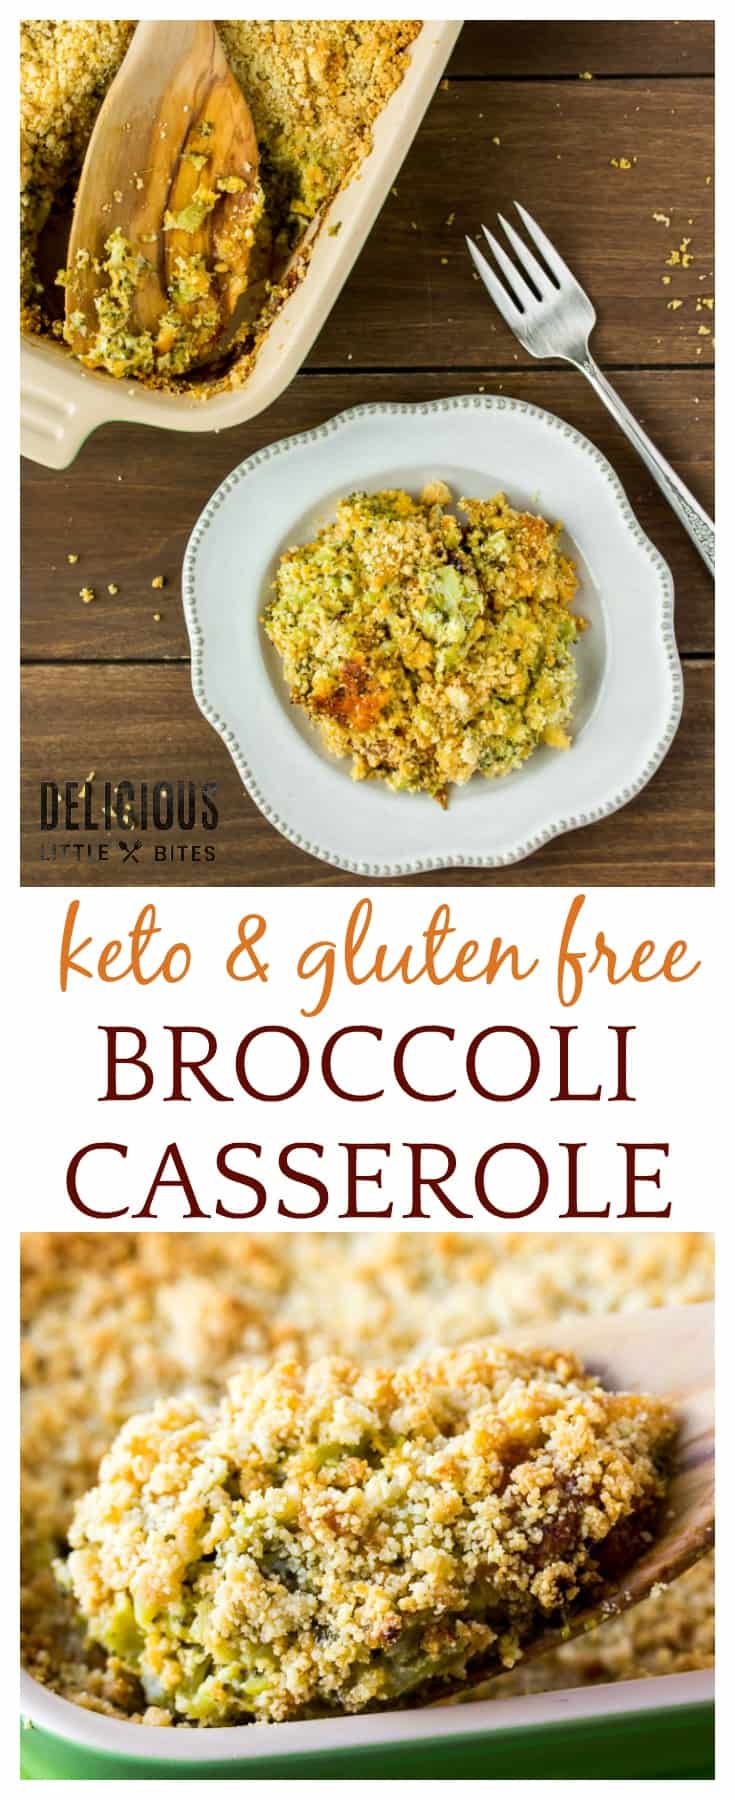 Keto Broccoli Casserole - a low carb version of the classic side dish recipe! It's made using all keto-friendly foods and just as tasty, if not tastier, than the original! Suitable for those following a keto, low carb, and/or gluten free diet! | #dlbrecipes #sidedish #ketorecipes #ketosidedish #lowcarbrecipes 